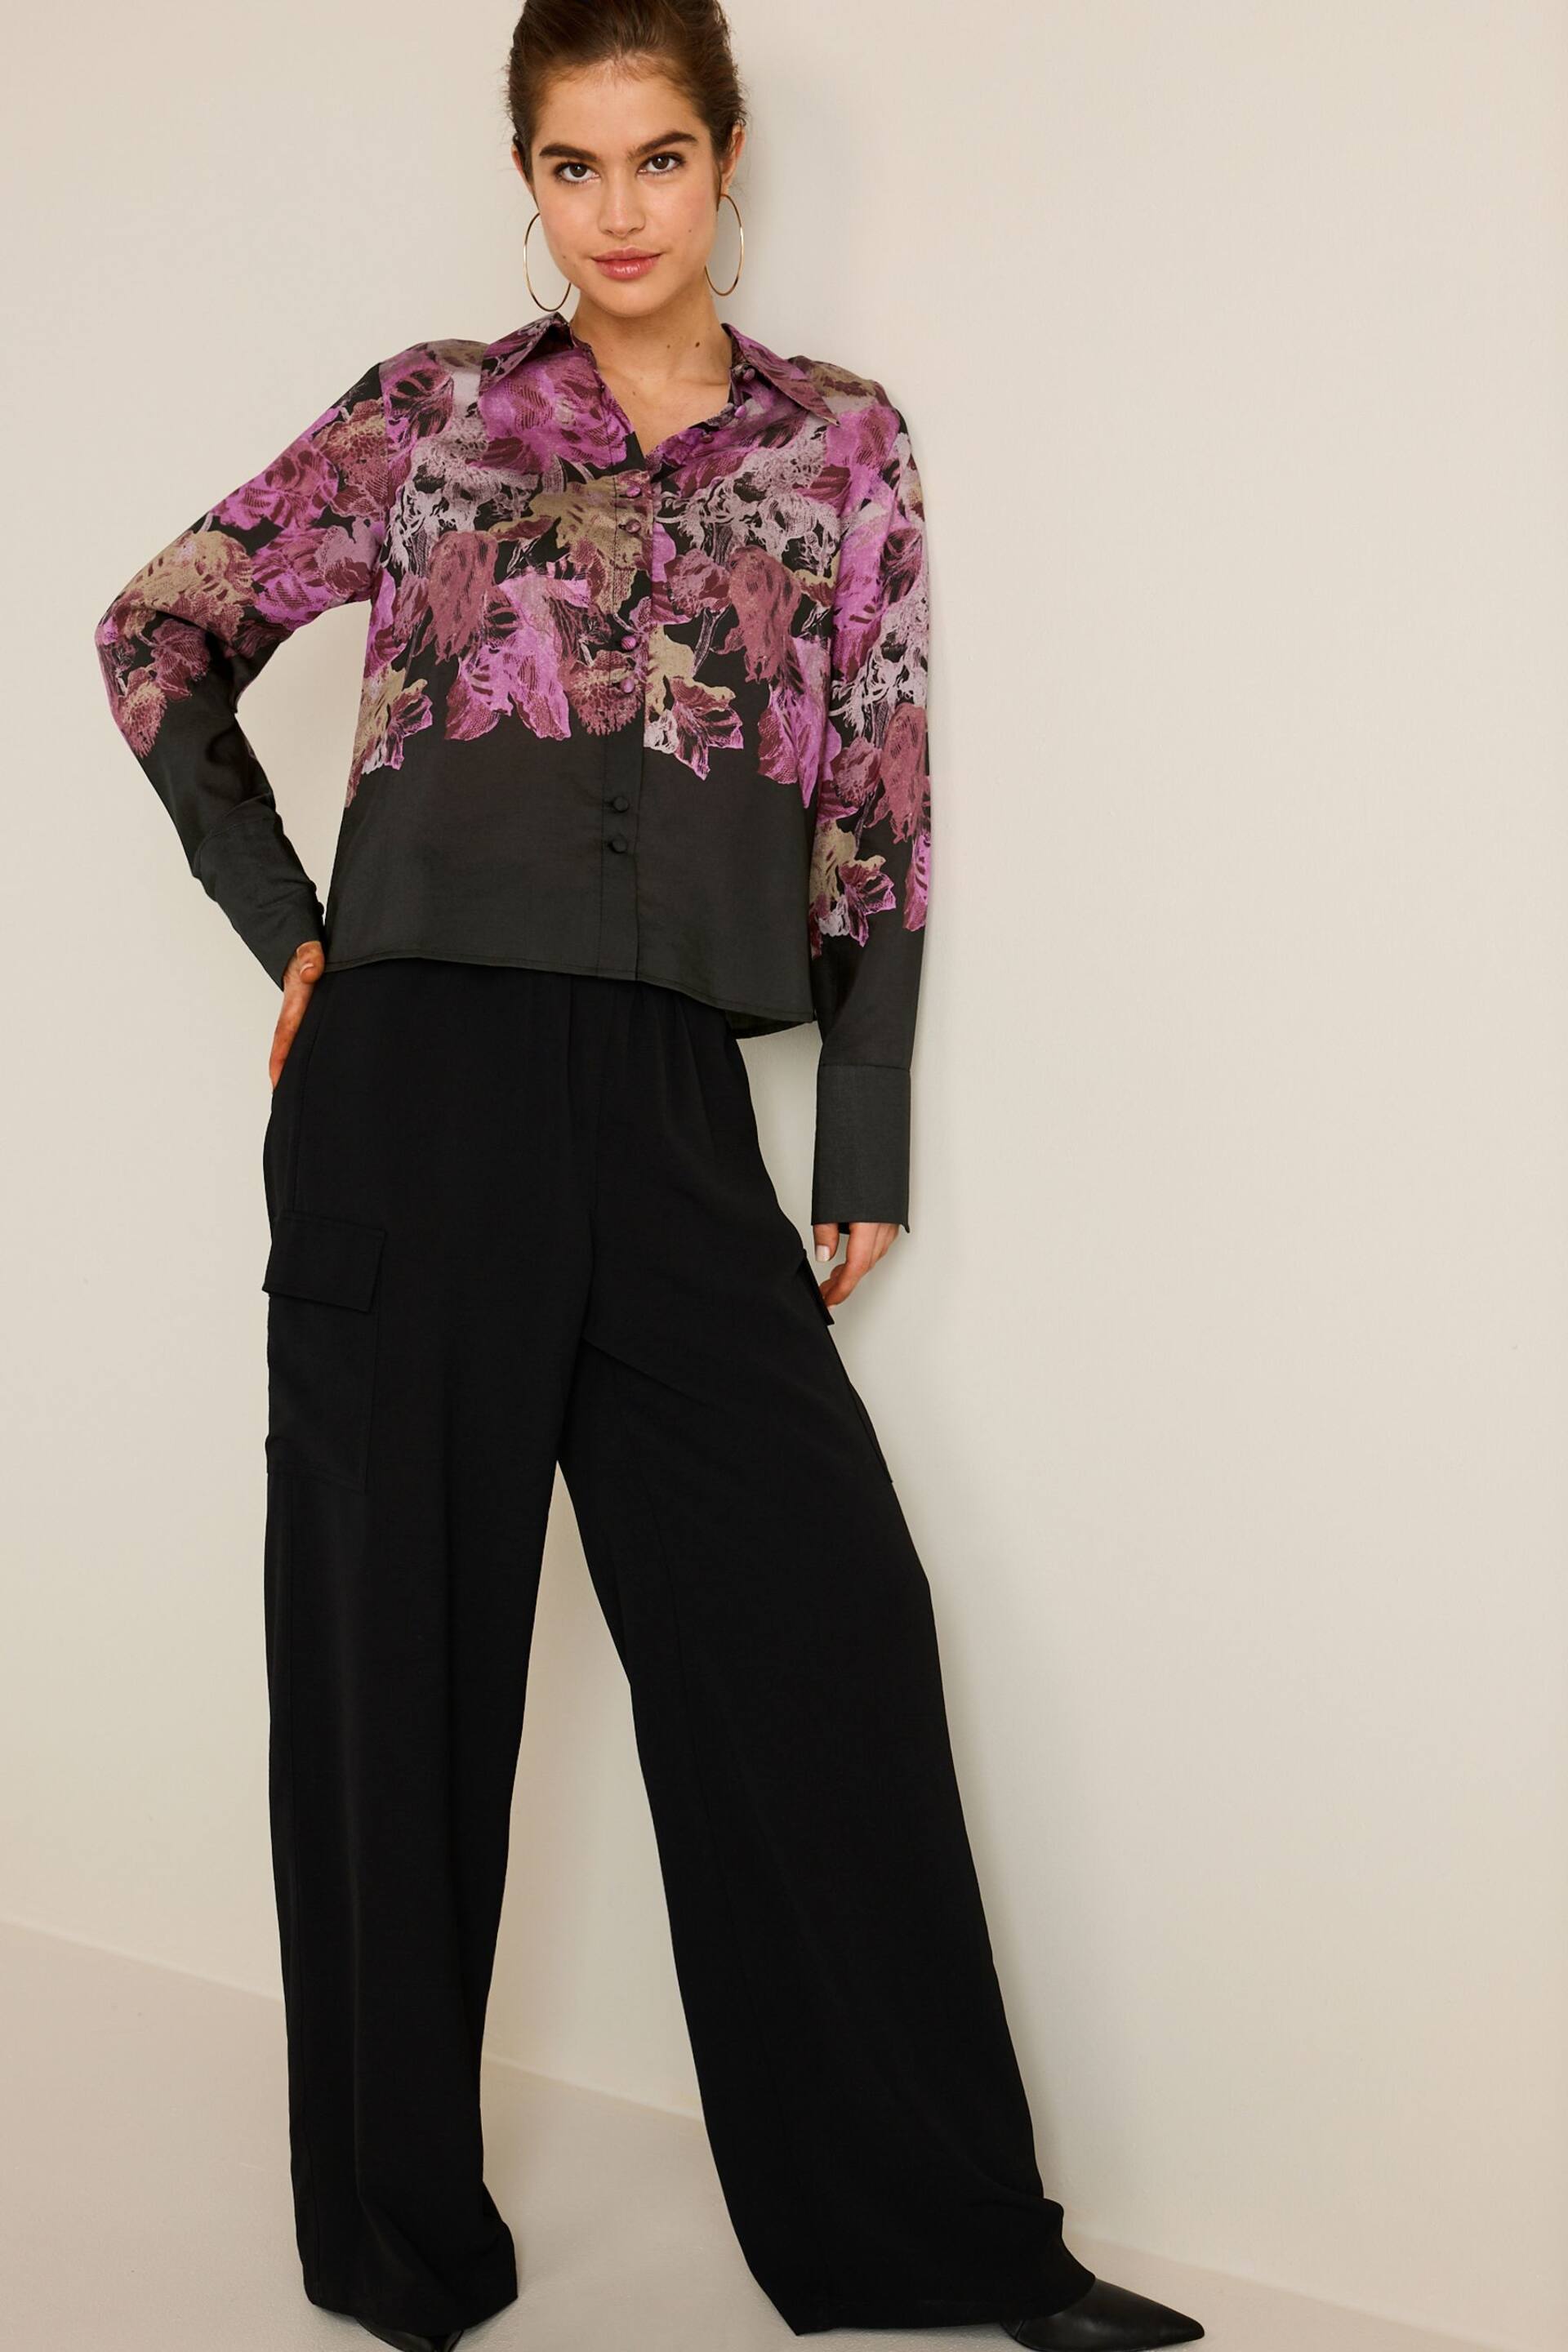 Purple/Black Floral Placement Sheer Placement Print Long Sleeve Shirt - Image 2 of 6